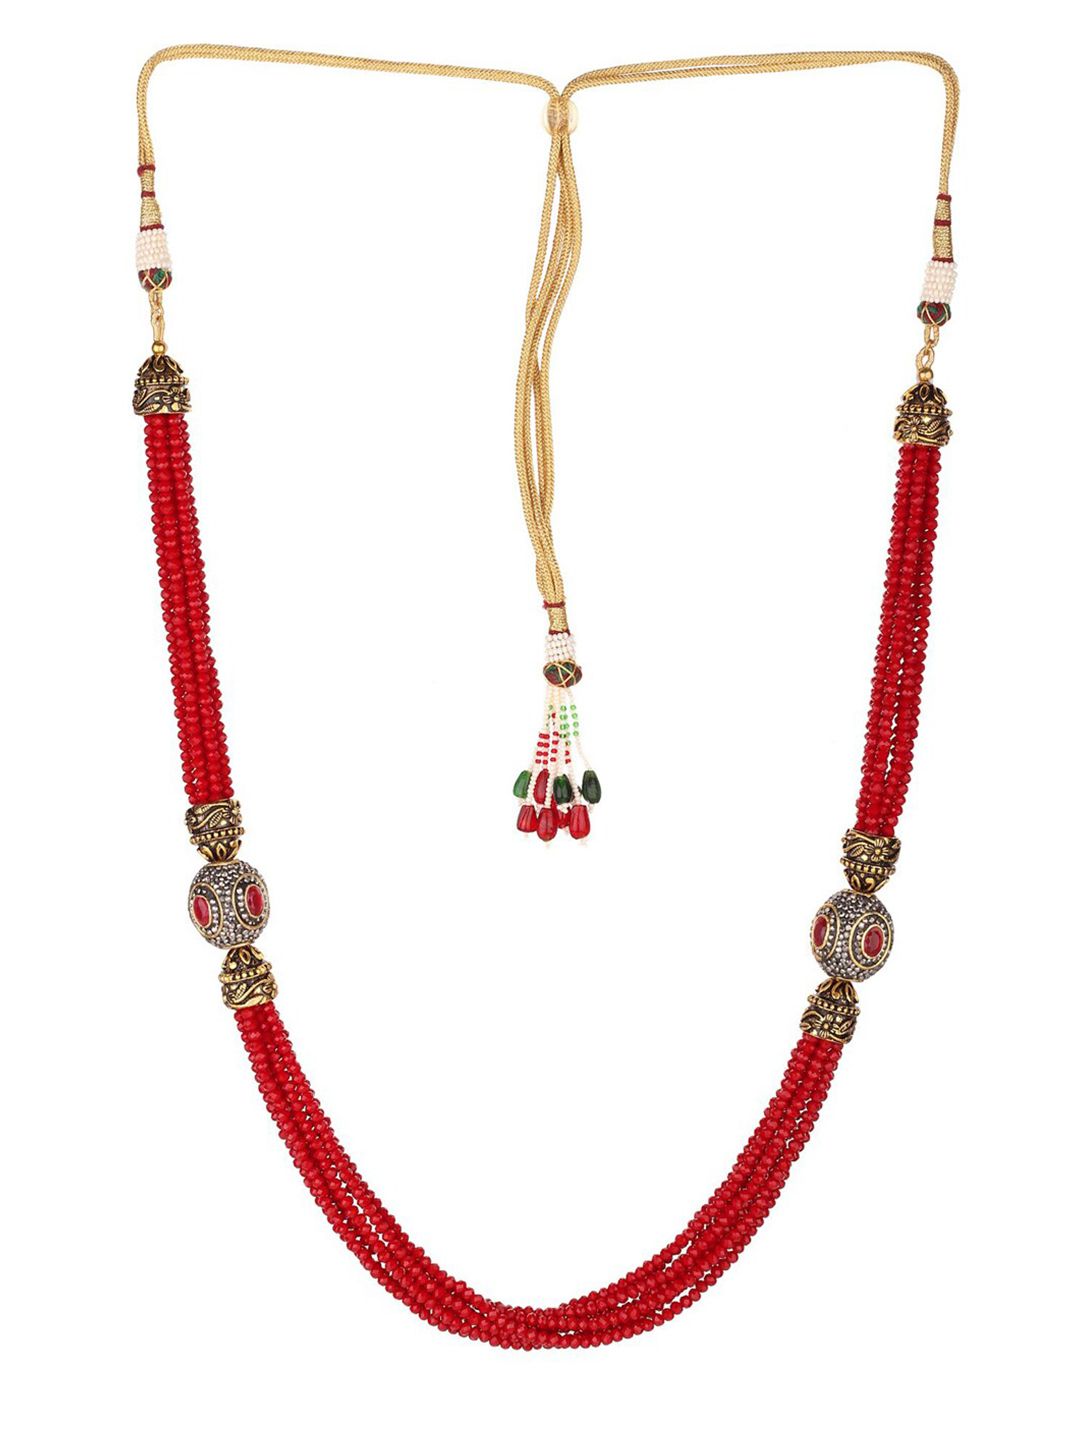 Runjhun Gold-Toned & Red Gold-Plated Necklace Price in India